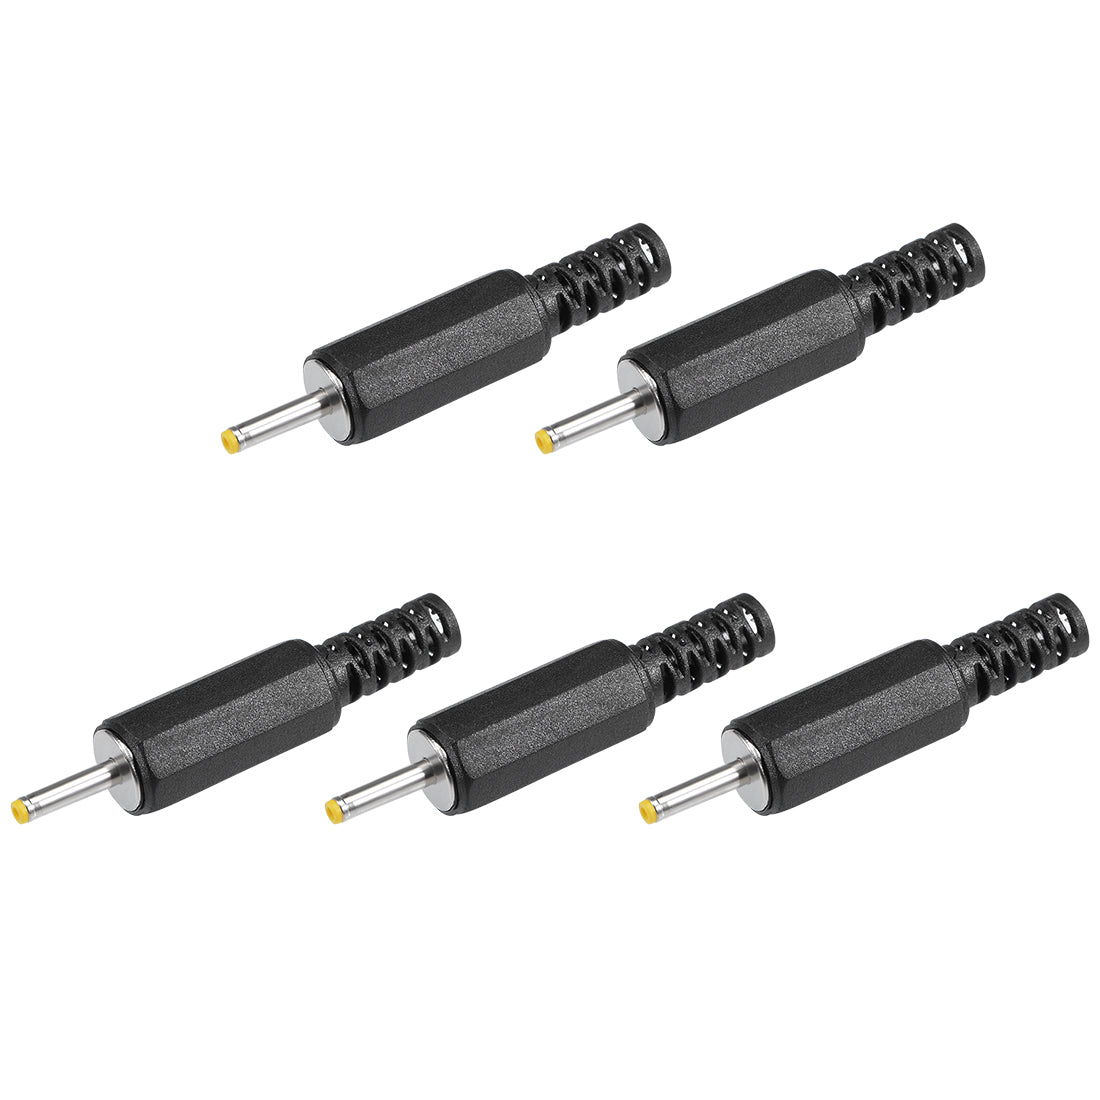 uxcell Uxcell 5Pcs DC Male Connector 2.5mm x 0.7mm Power Cable Jack Adapter Black